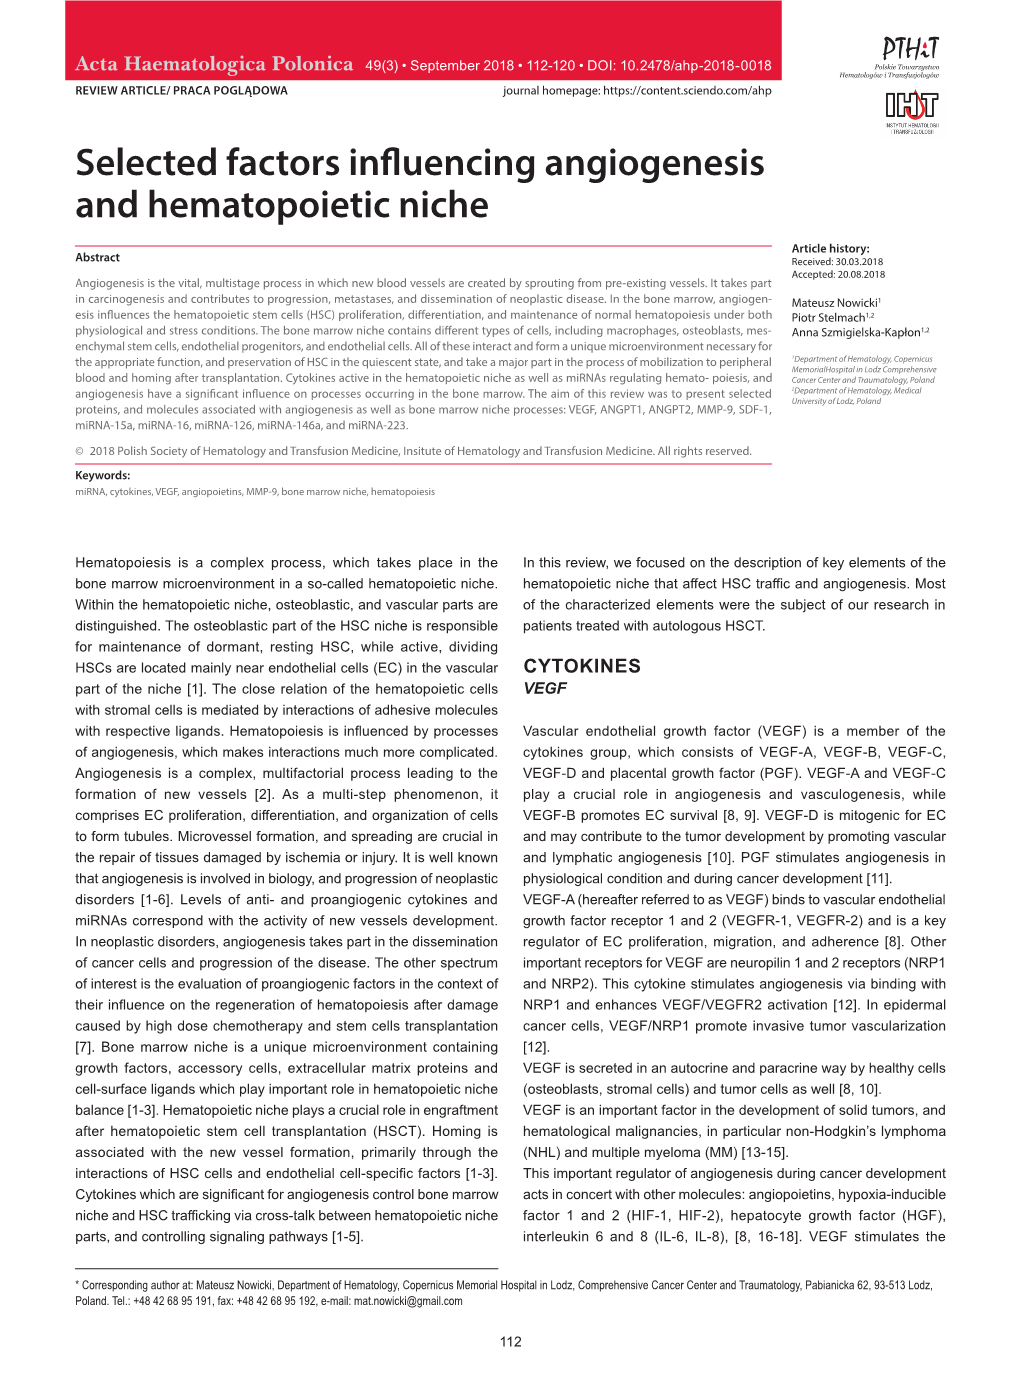 Selected Factors Influencing Angiogenesis and Hematopoietic Niche